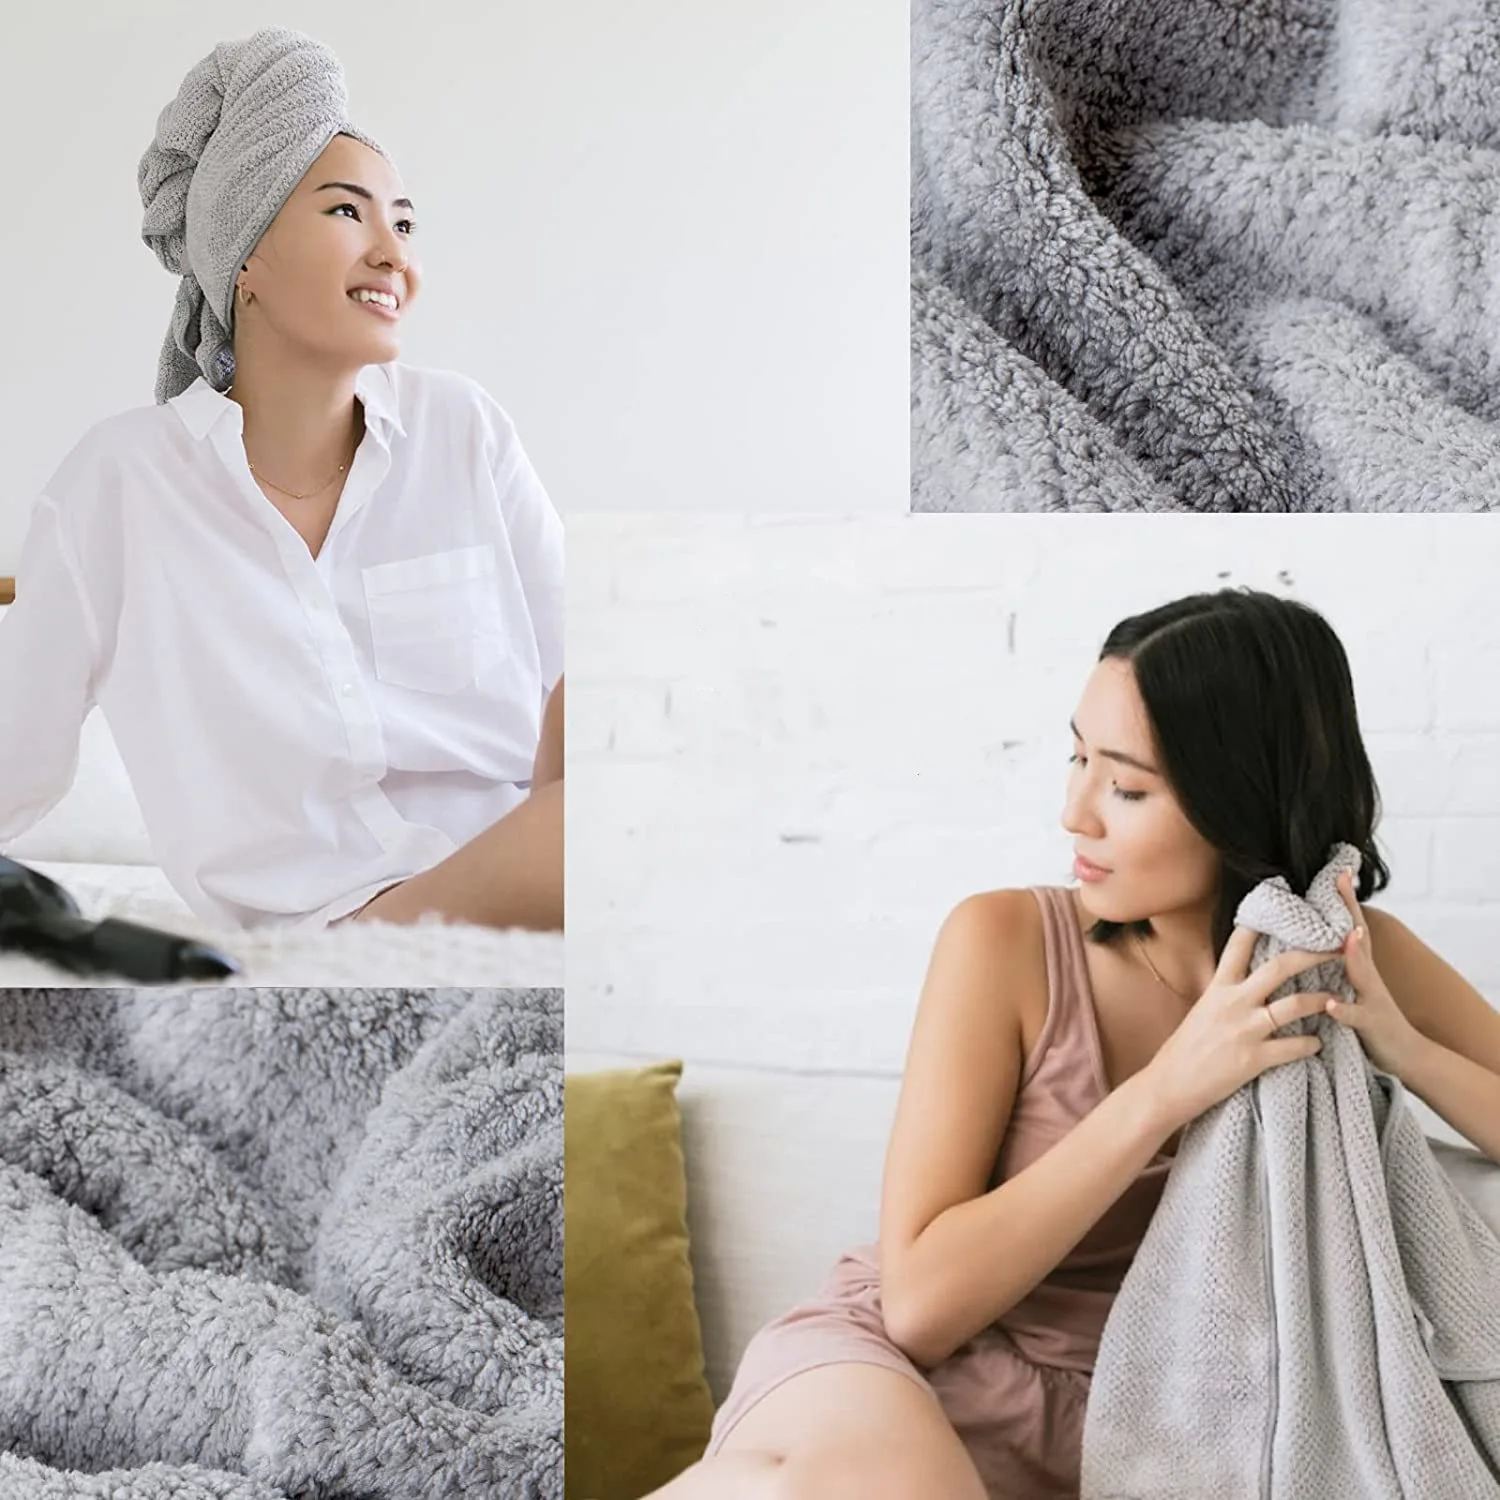 Large size women's dry hair towel microfiber wrapping cloth with elastic band wet hair quick-drying headscarf